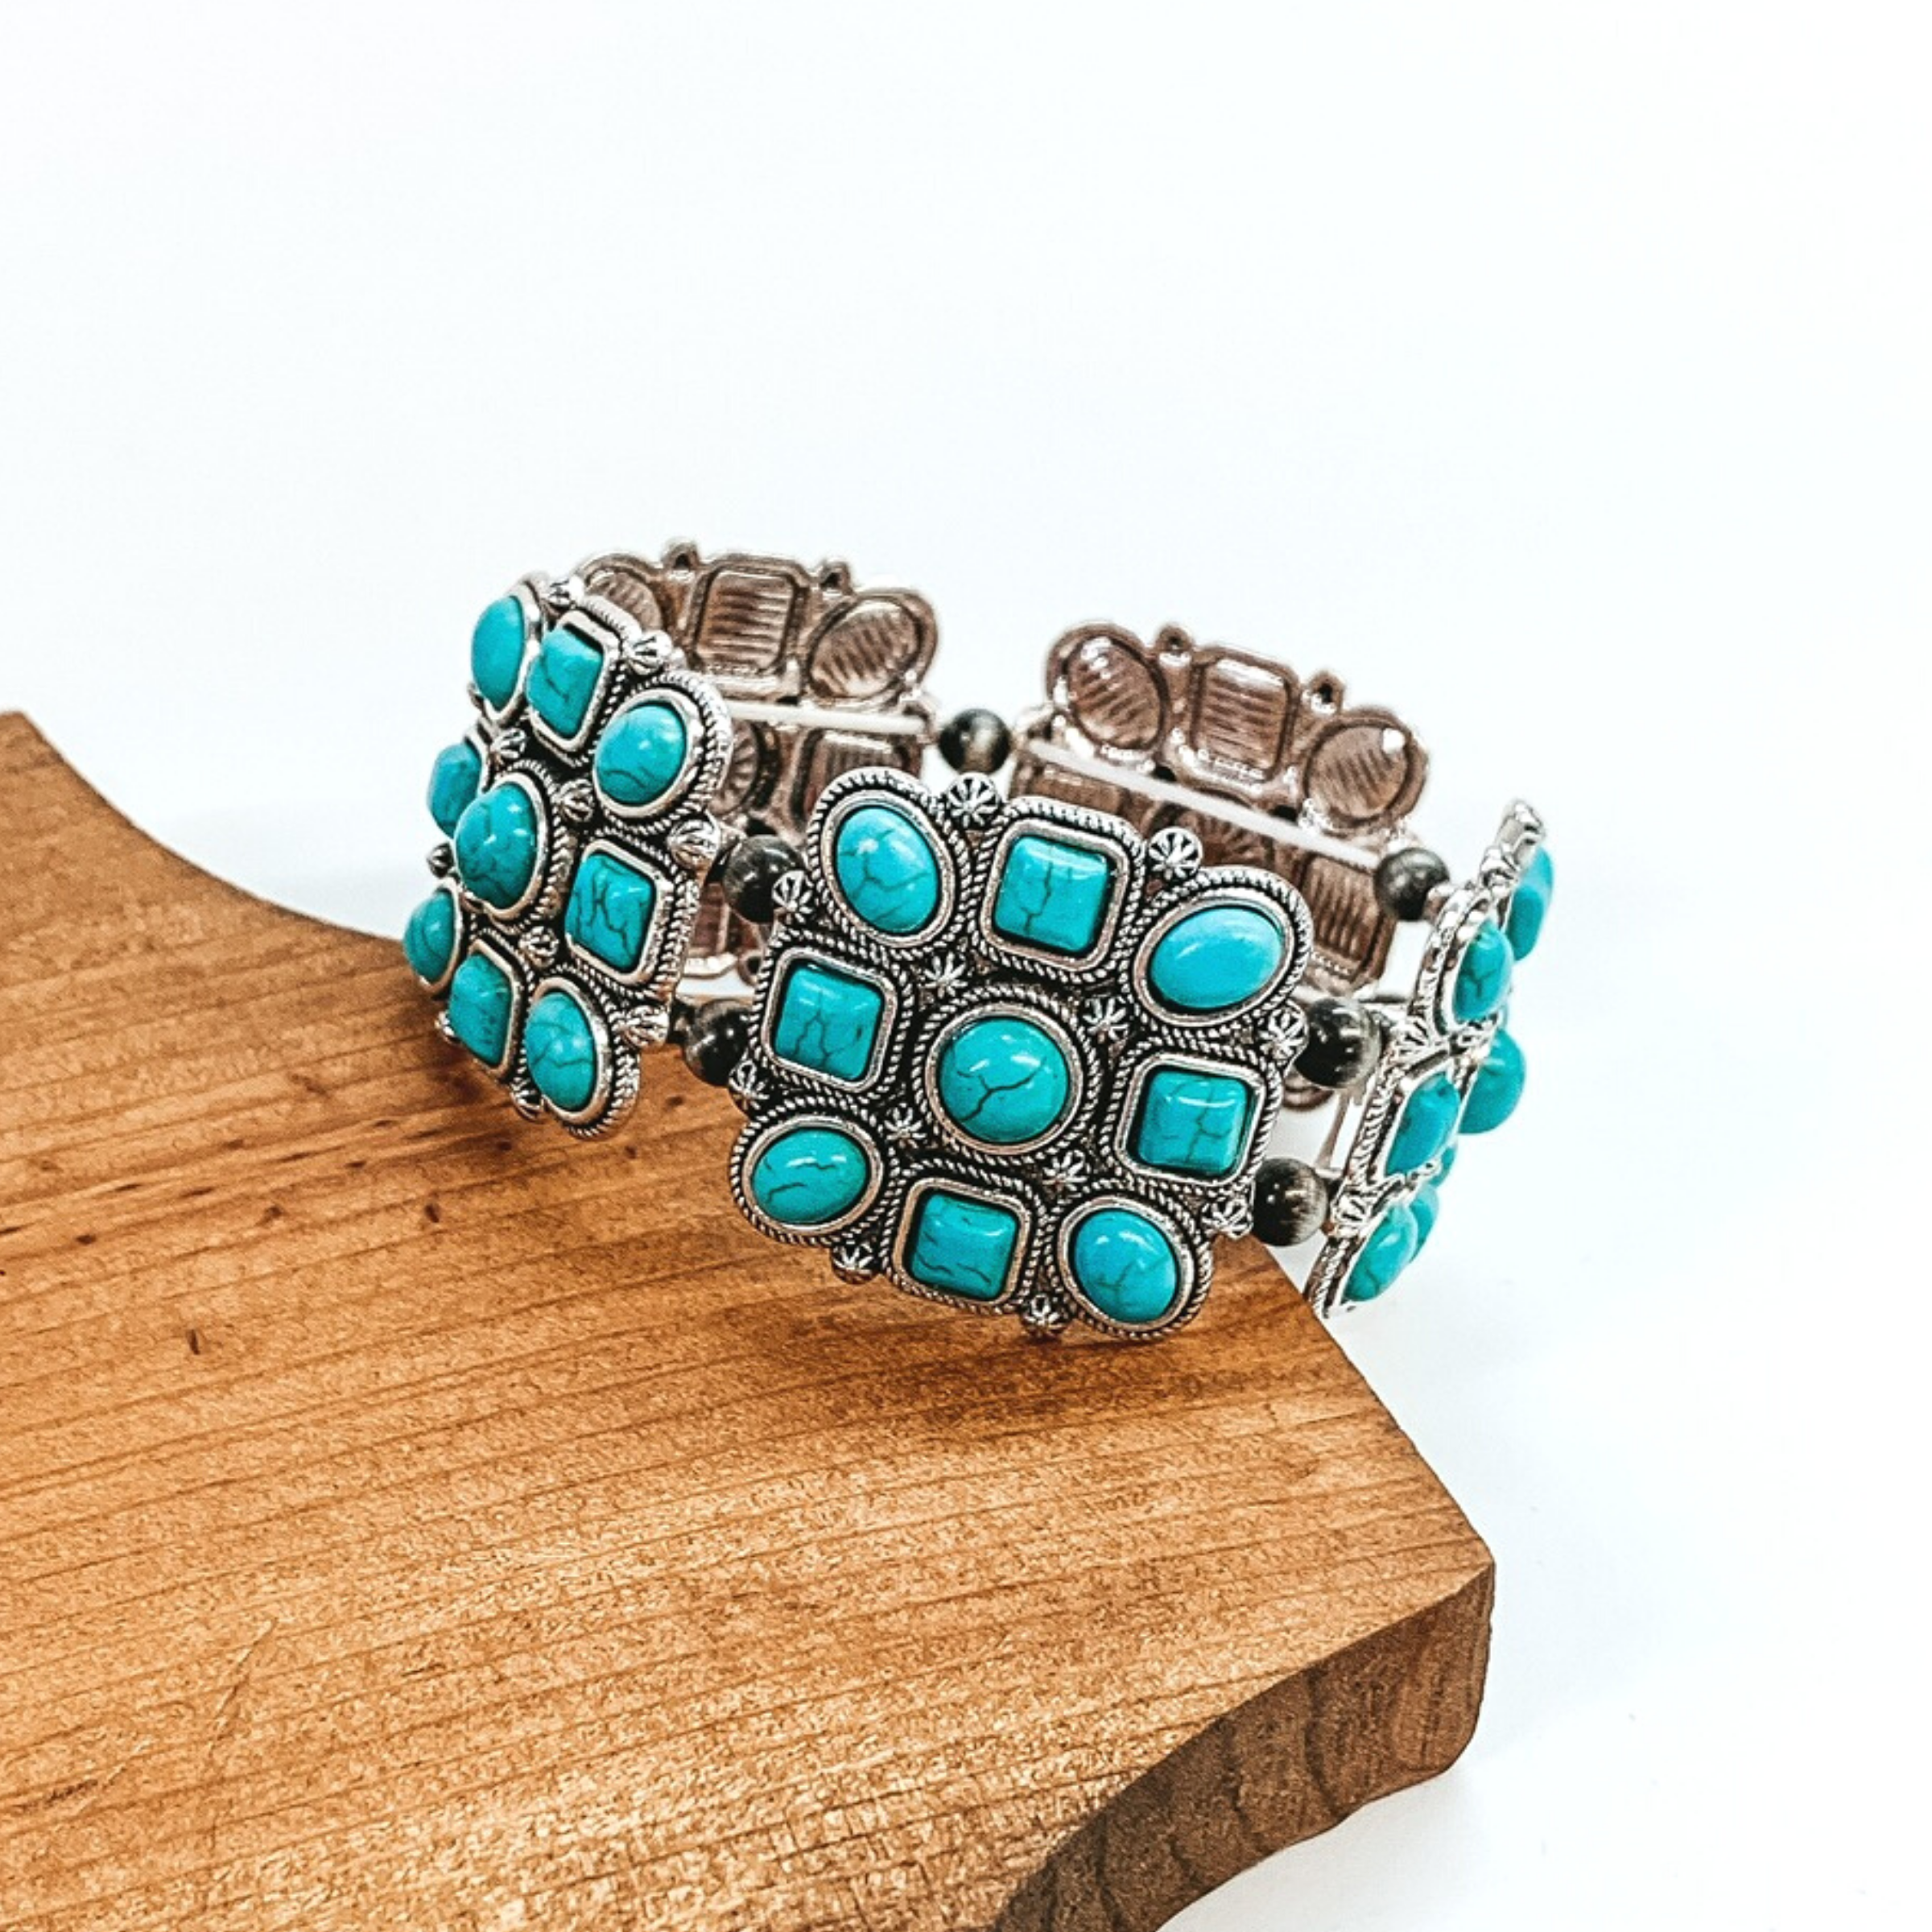 Square Stone Bracelet in Turquoise - Giddy Up Glamour Boutique